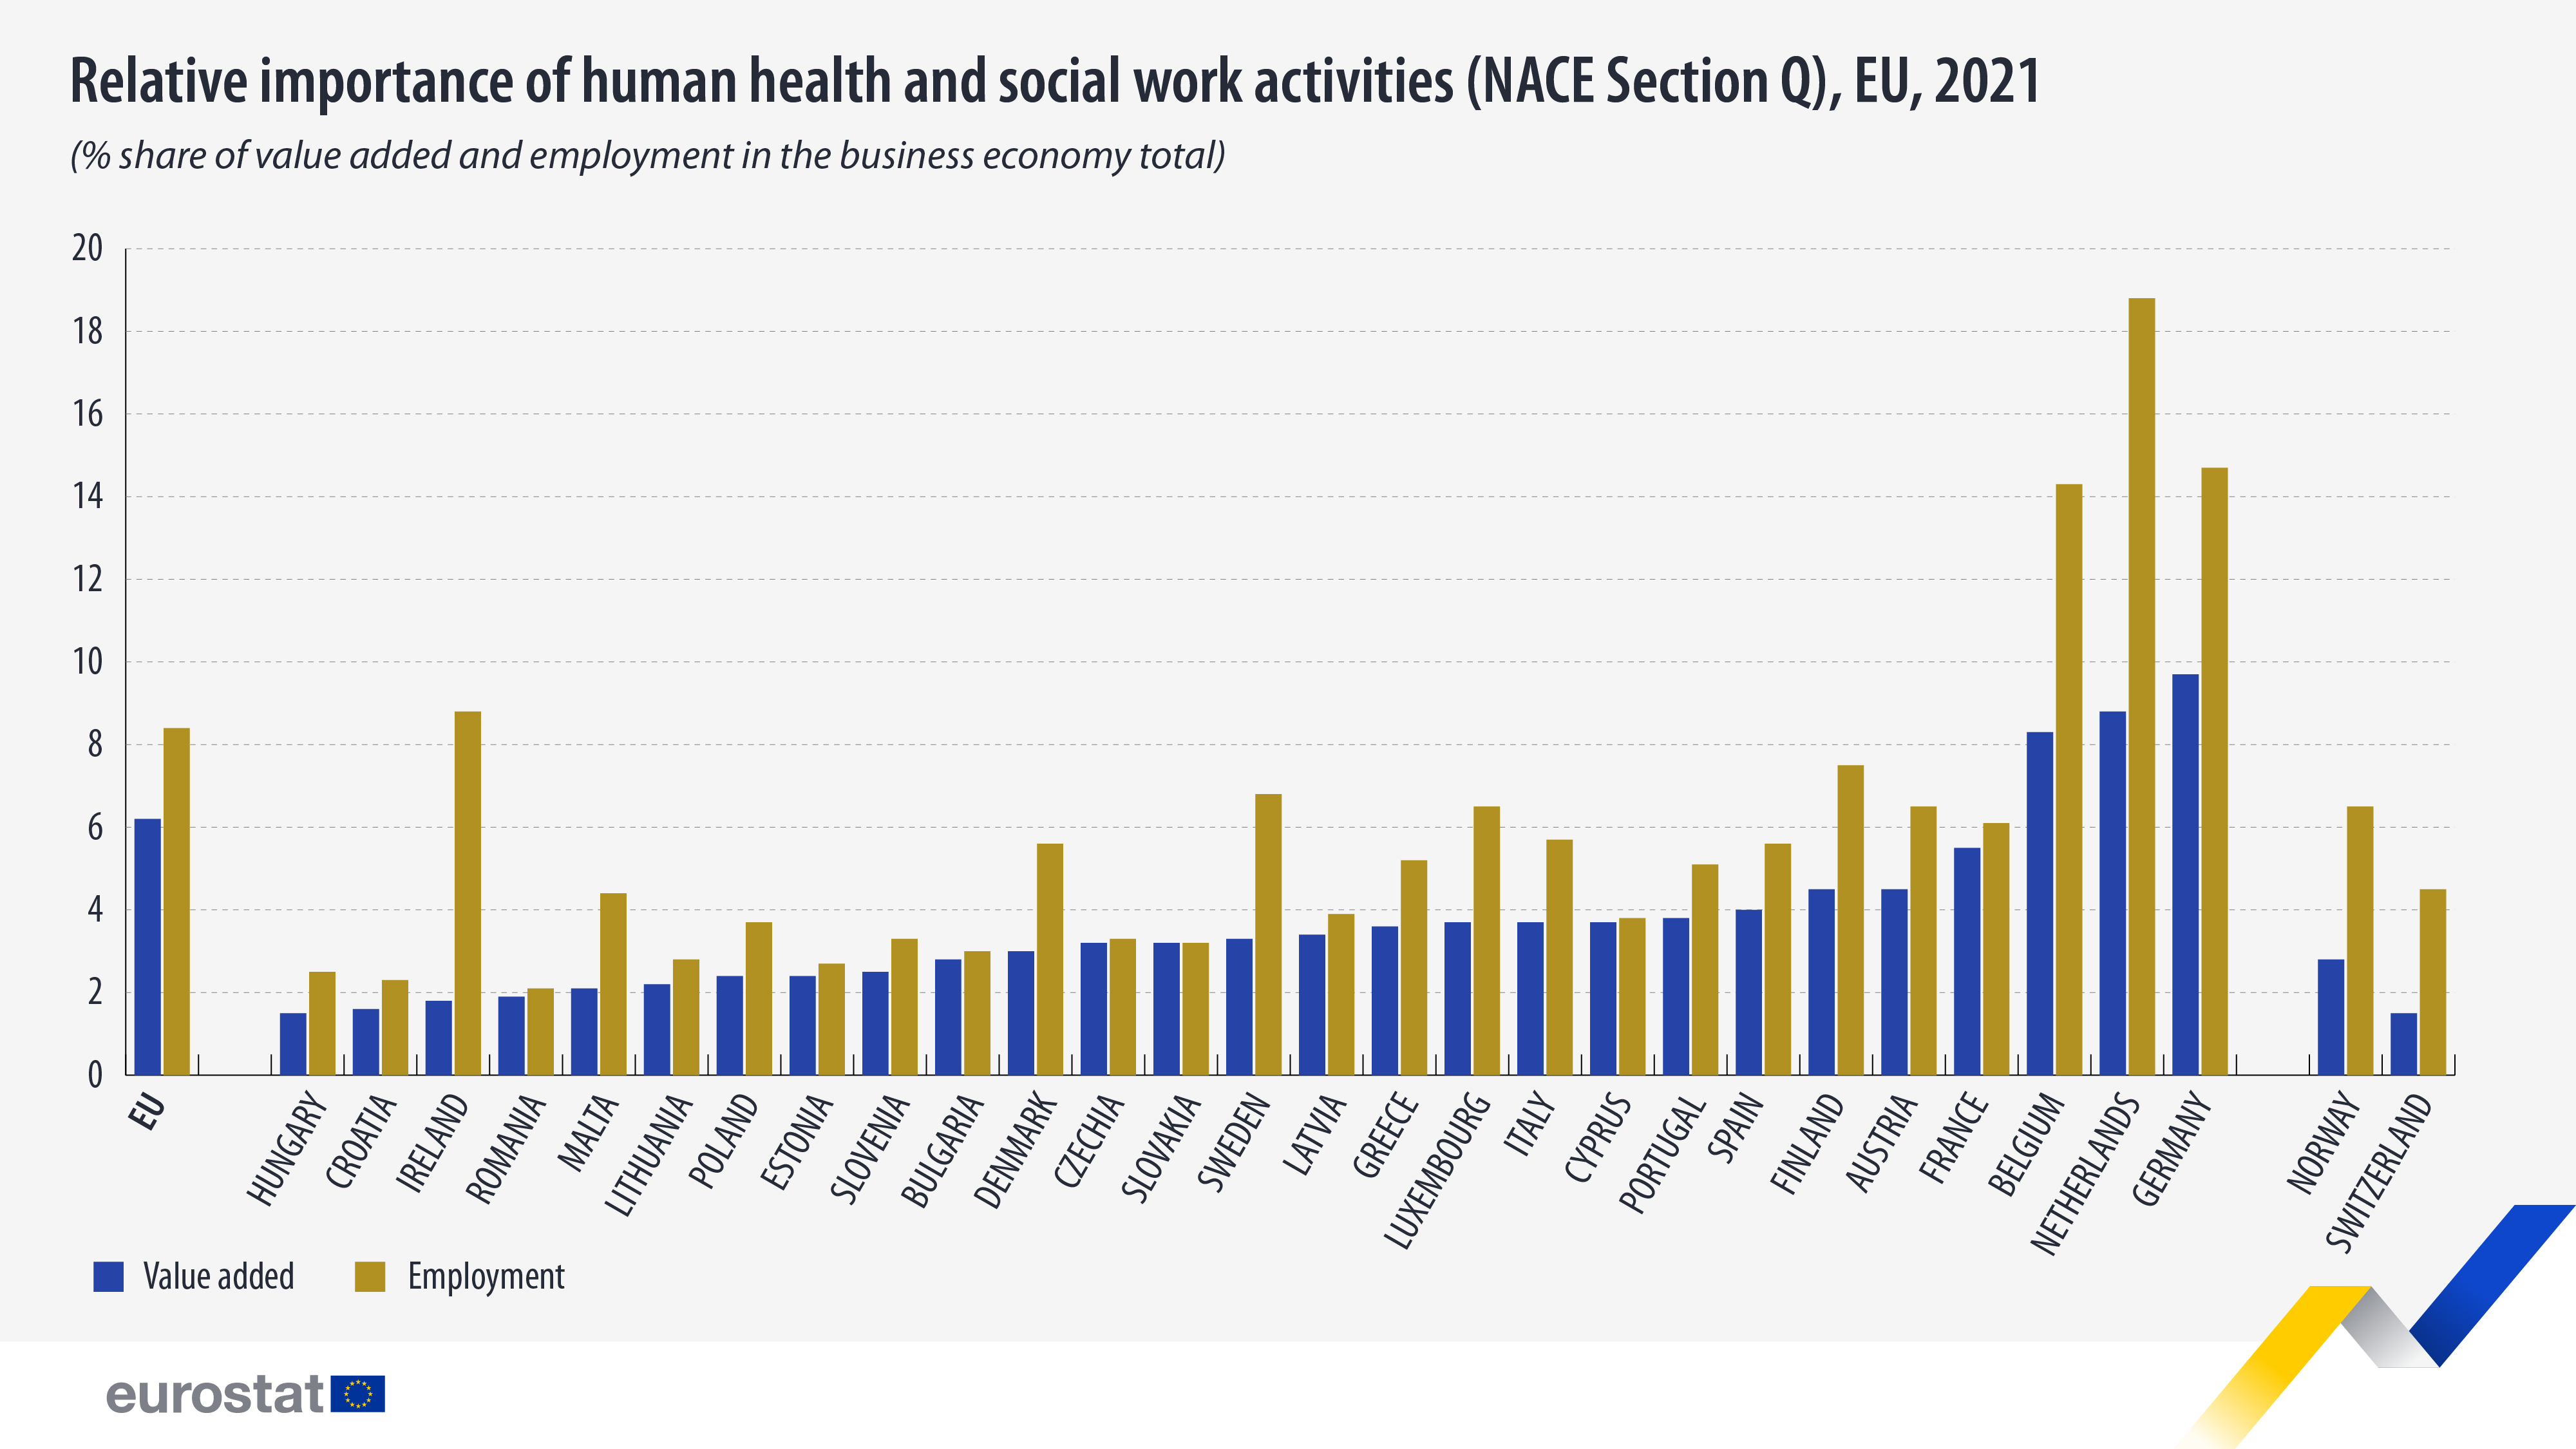 Relative importance of human health and social work activities (NACE Section Q), EU, 2021. Bar chart. For more information click dataset below.